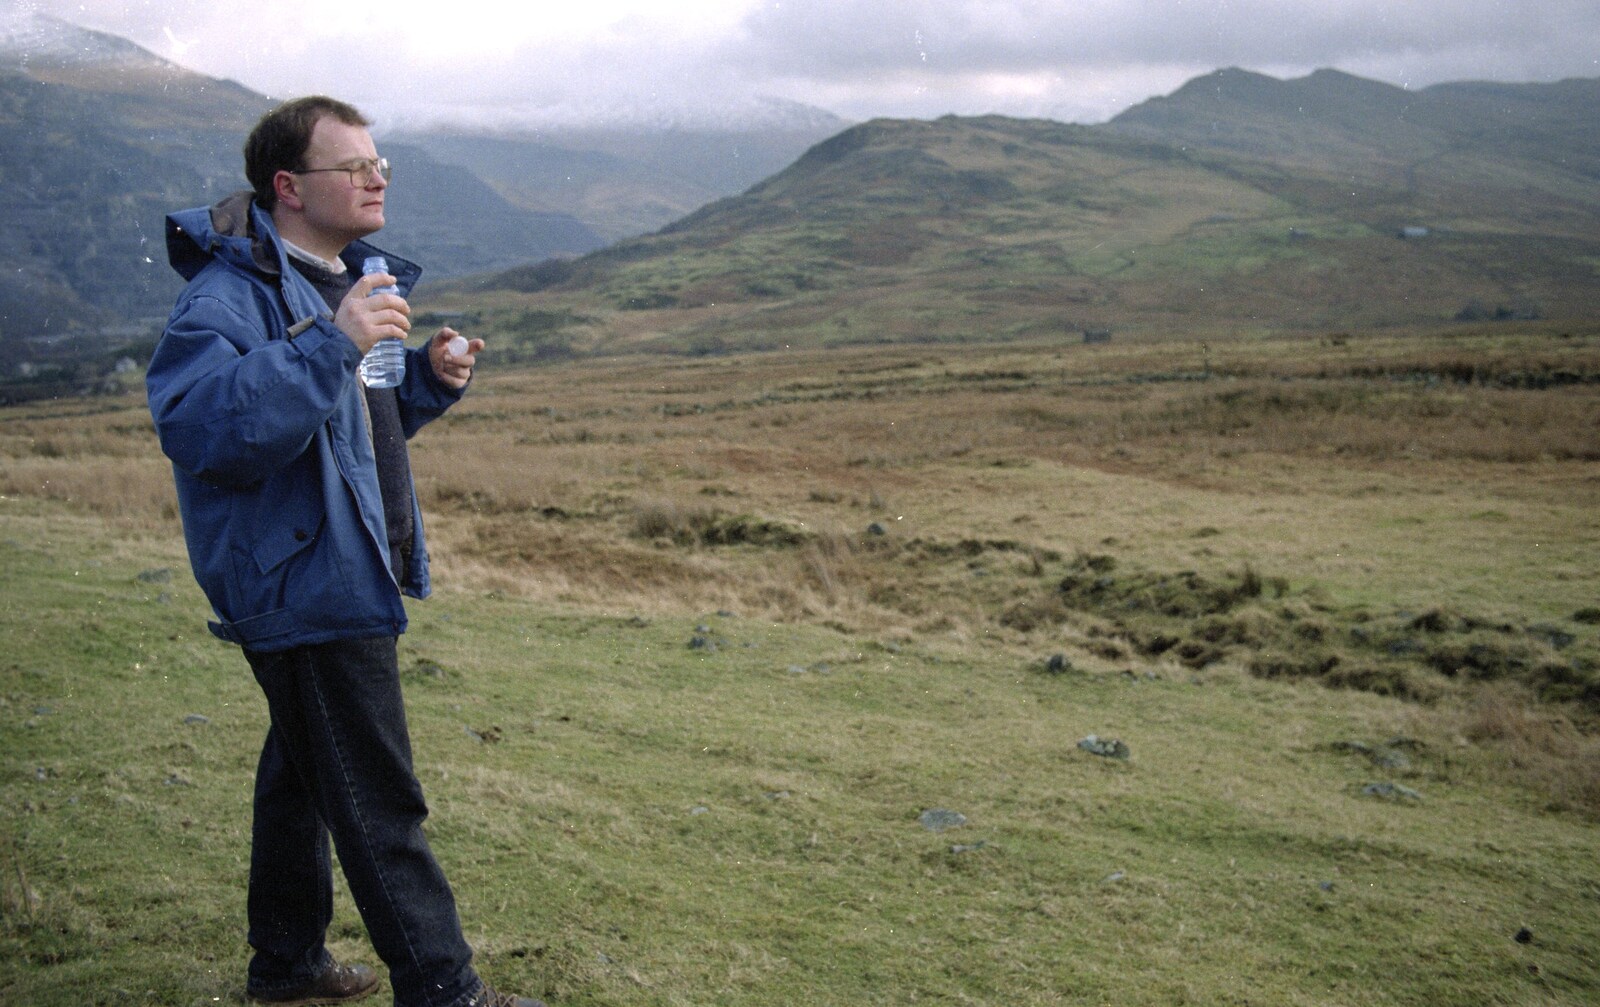 Hamish sips some water and surveys the view from Capel Curig to Abergavenny: A Road-Trip With Hamish, Wales - 3rd April 1992